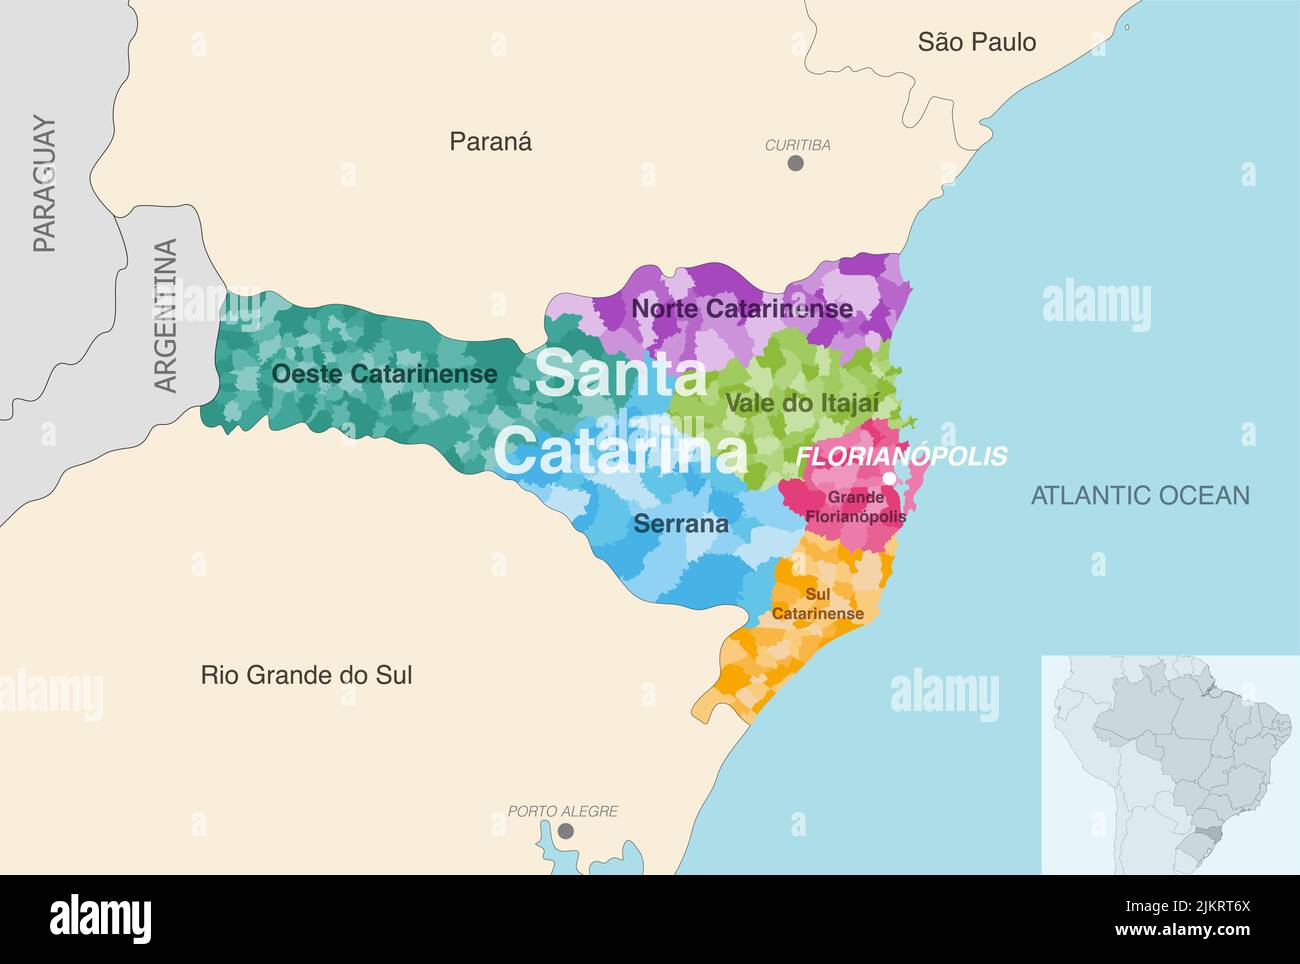 Brazil state Santa Catarina administrative map showing municipalities colored by state regions (mesoregions) Stock Vector